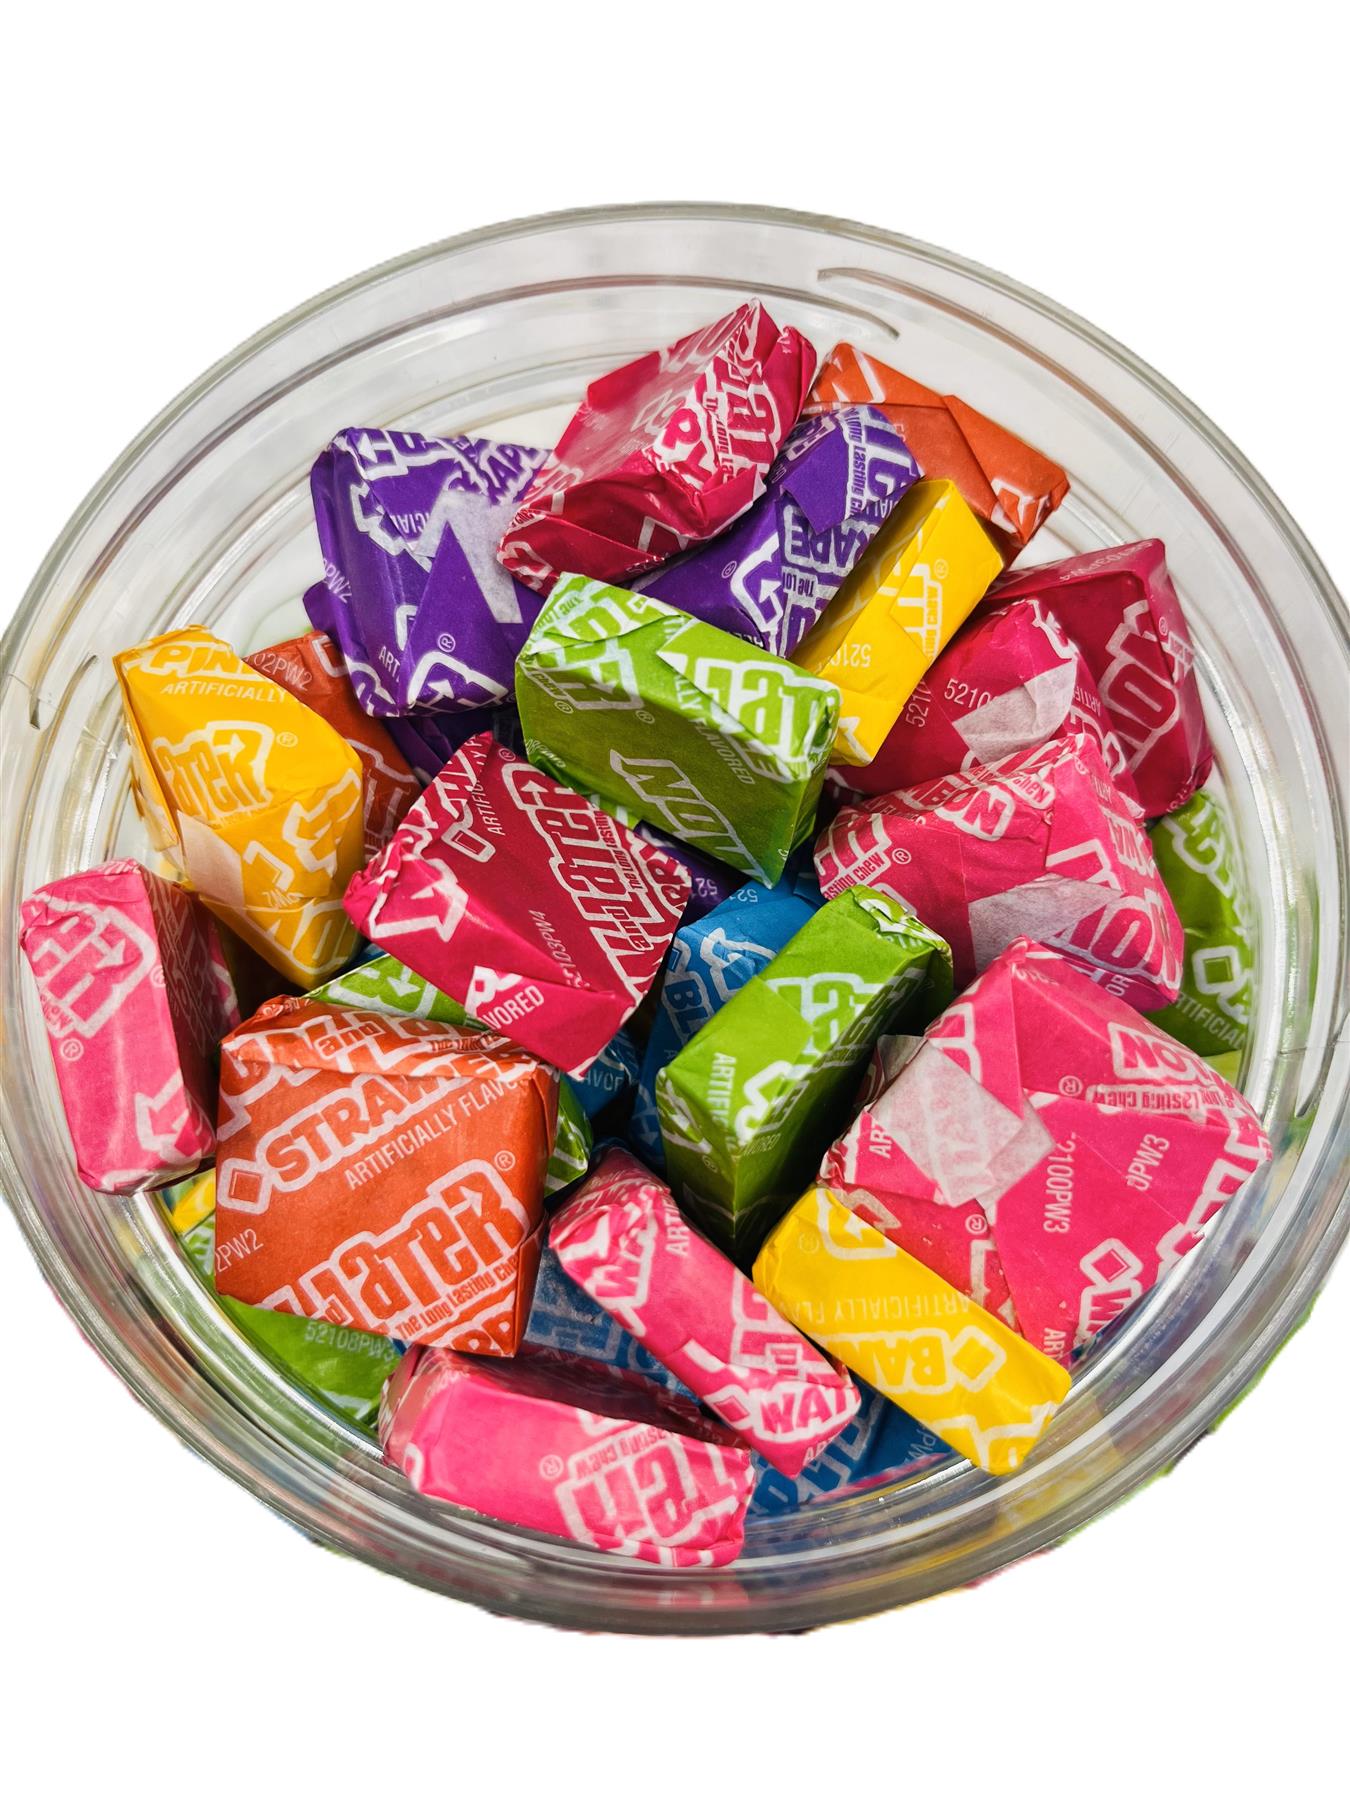 Simway Sweets Jar 765g - Now & Laters - Individually Wrapped American Sweets - Approximately 144 Pieces